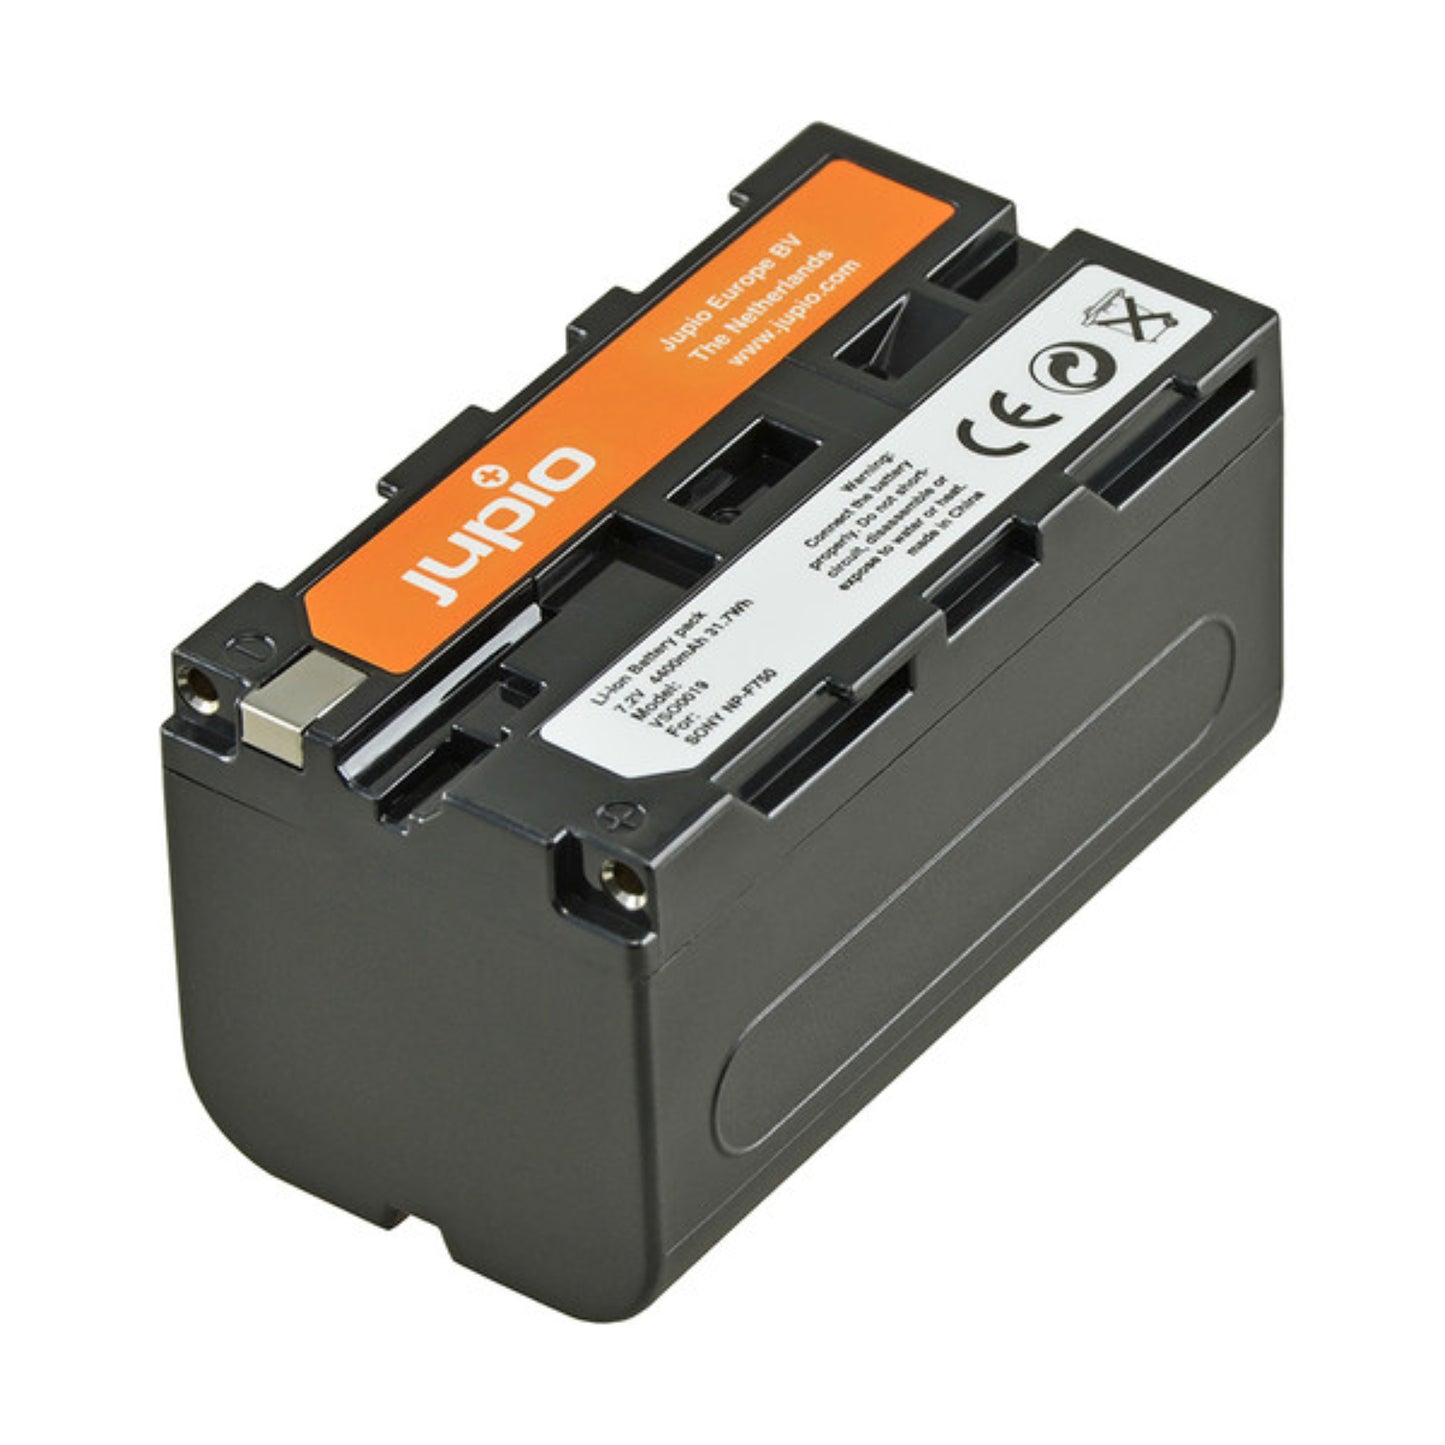 Jupio NP-F750 Lithium-Ion Battery Pack - Sony L Type